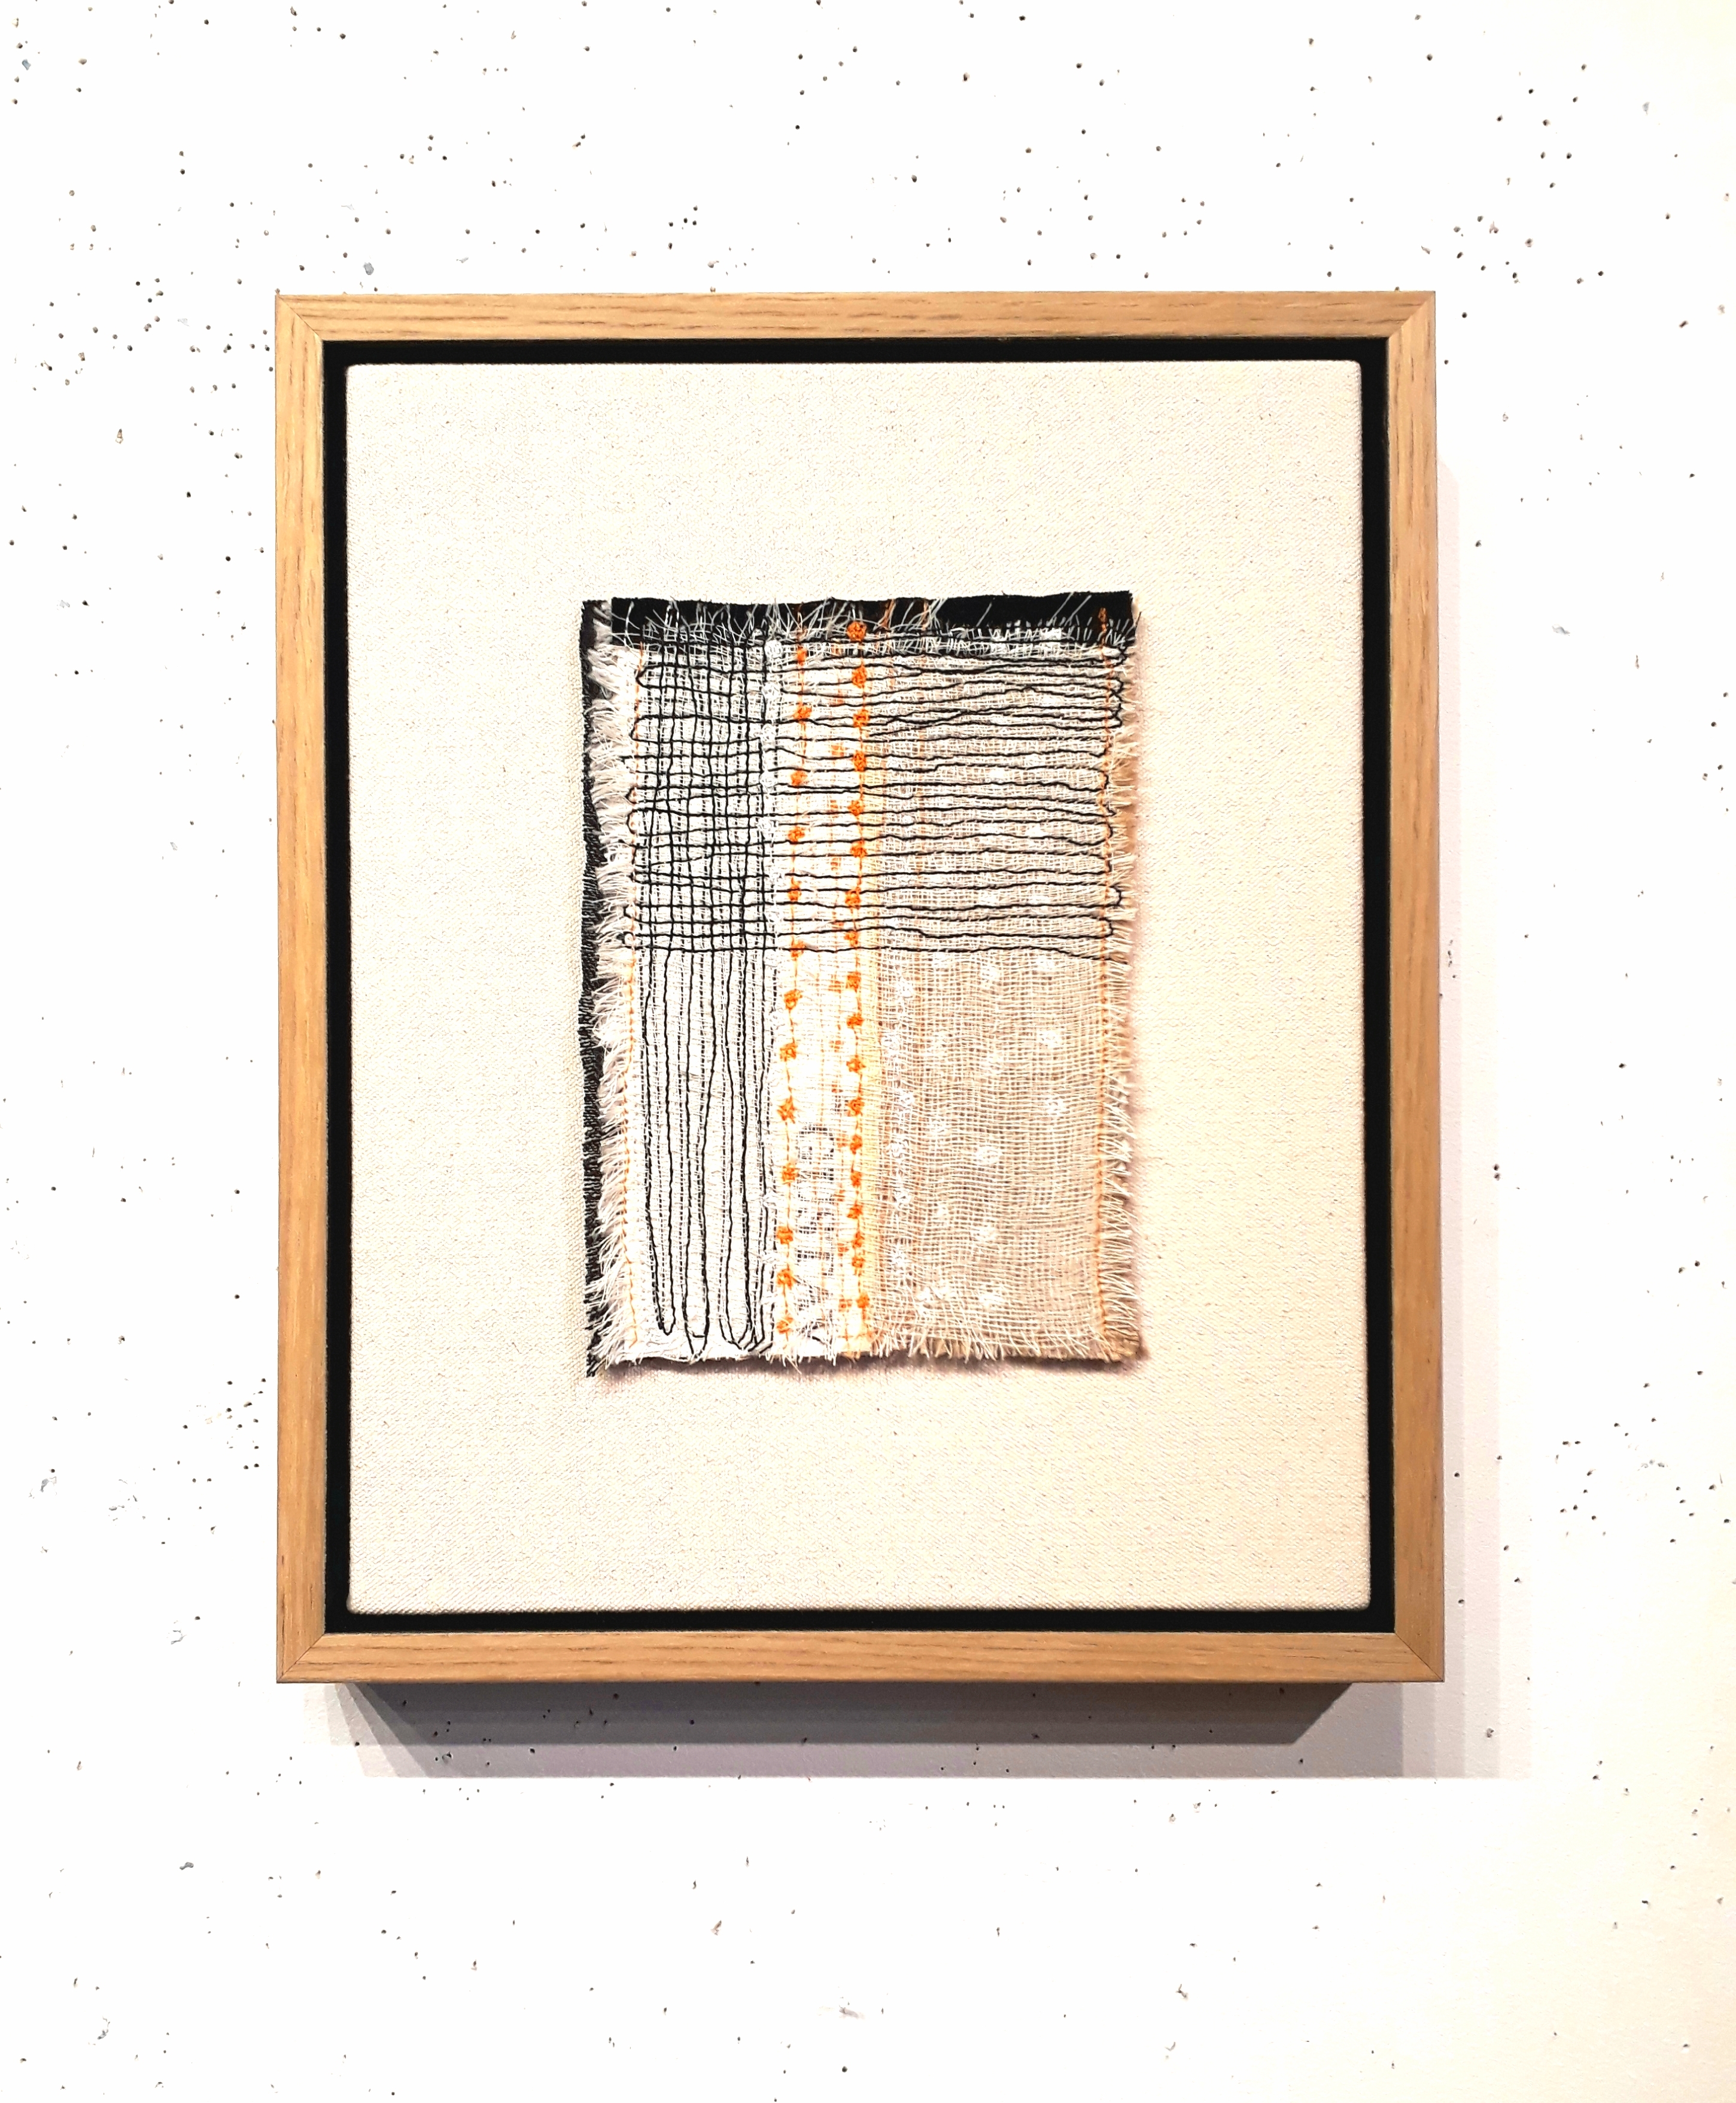 Oeuvre textile - Patricia Kelly